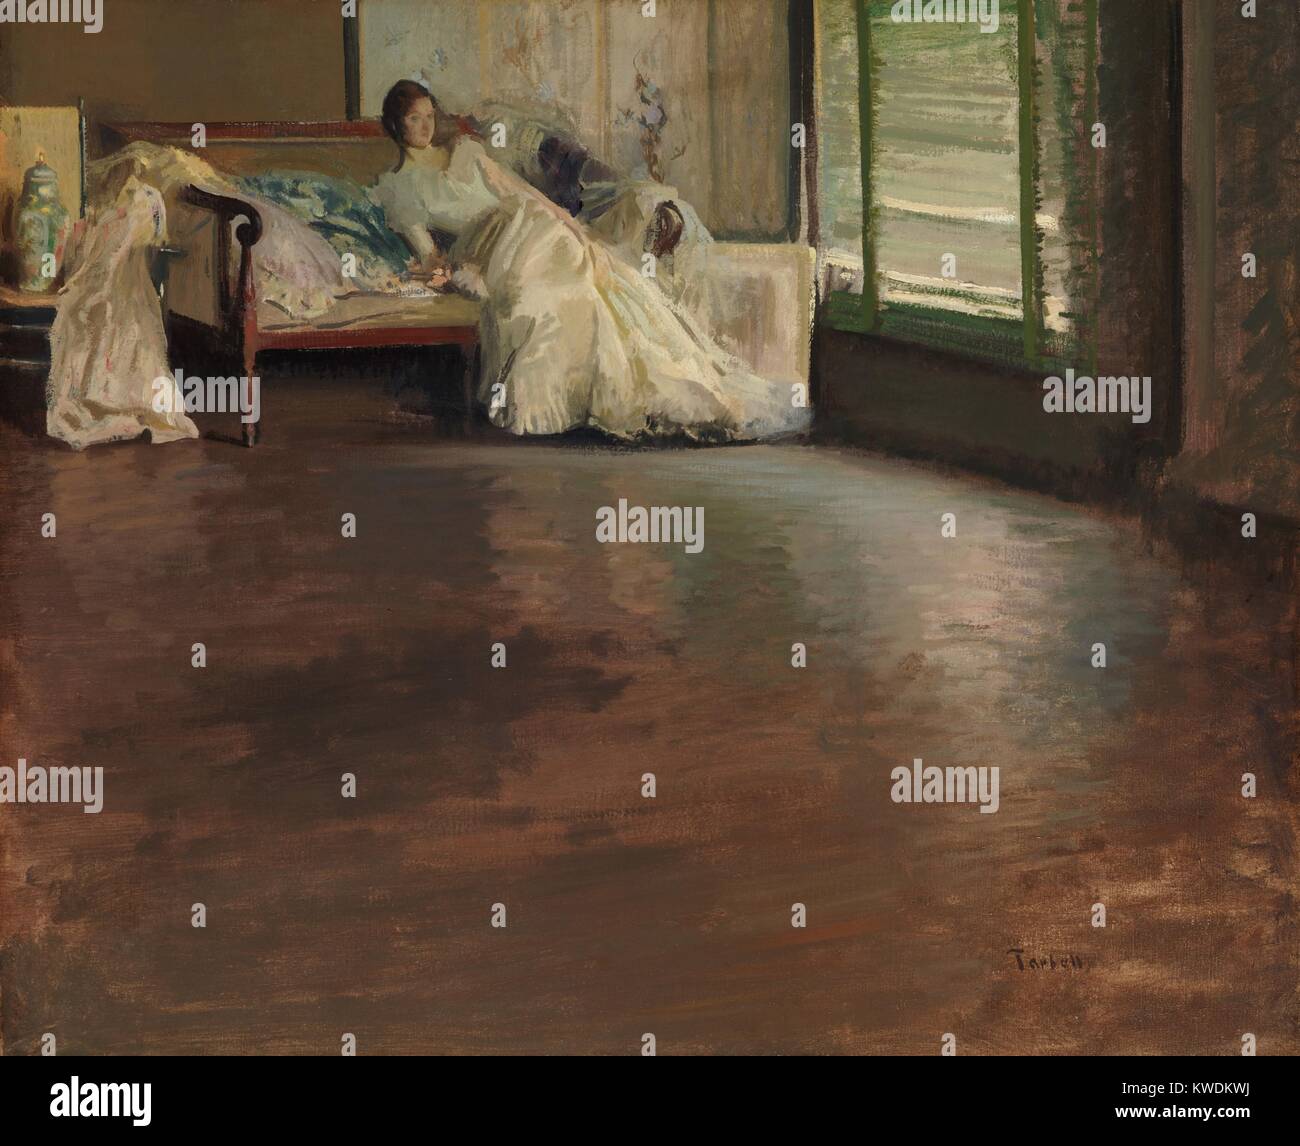 ACROSS THE ROOM, by Edmund Charles Tarbell, 1899, American painting, oil on canvas. A reclining young woman is painted from across a wide, polished floor. Impressionist technique is seen in the play of light depicted with loose, fluid brushwork (BSLOC 2017 9 37) Stock Photo